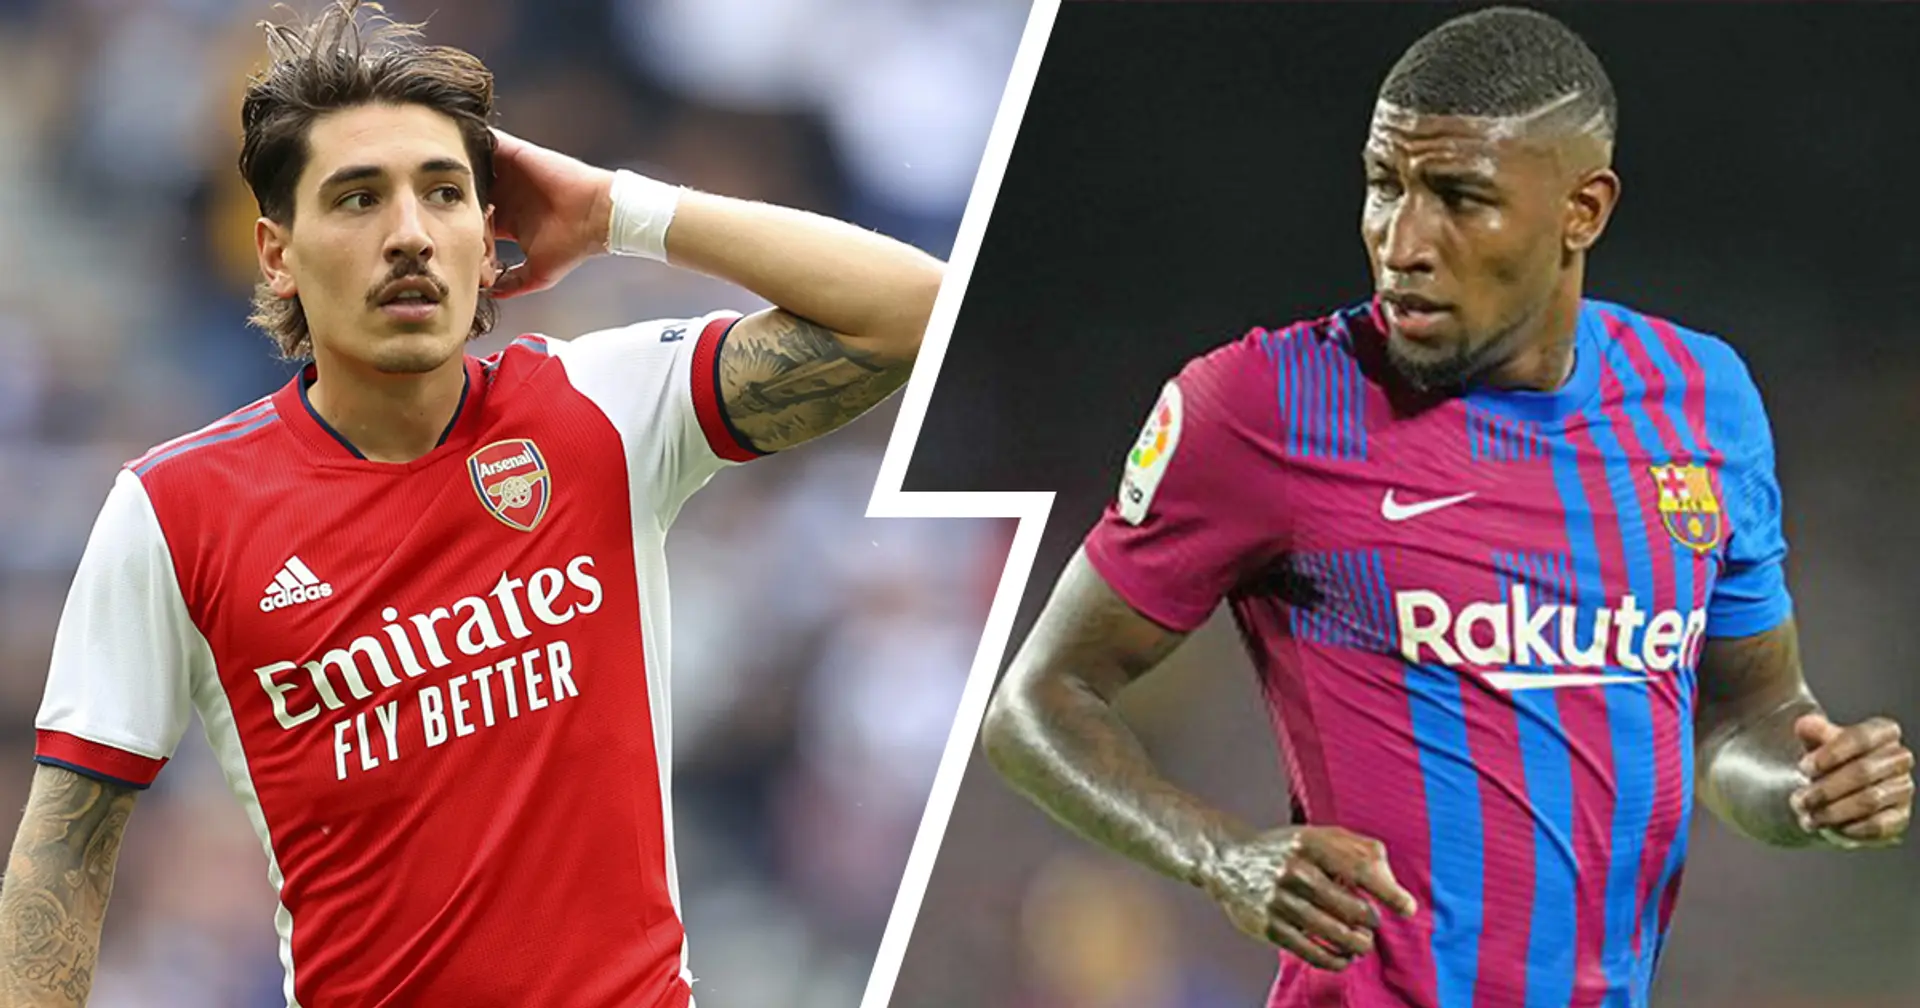 Arsenal consider swapping Bellerin for Emerson Royal (reliability: 5 stars)